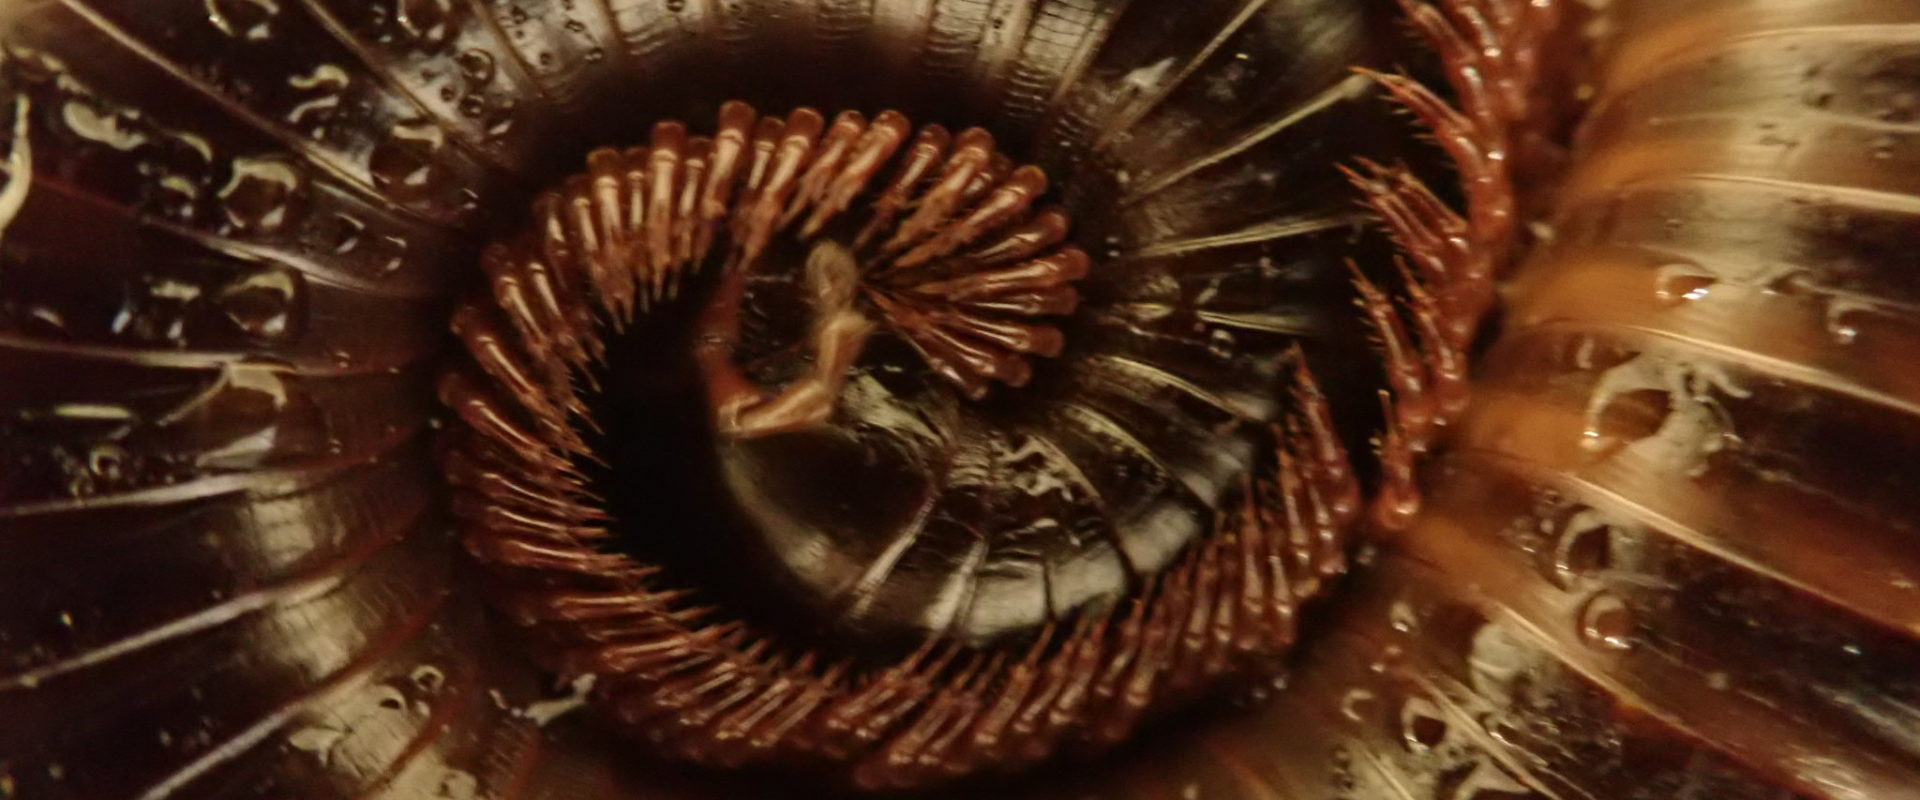 A giant African millipede curled up